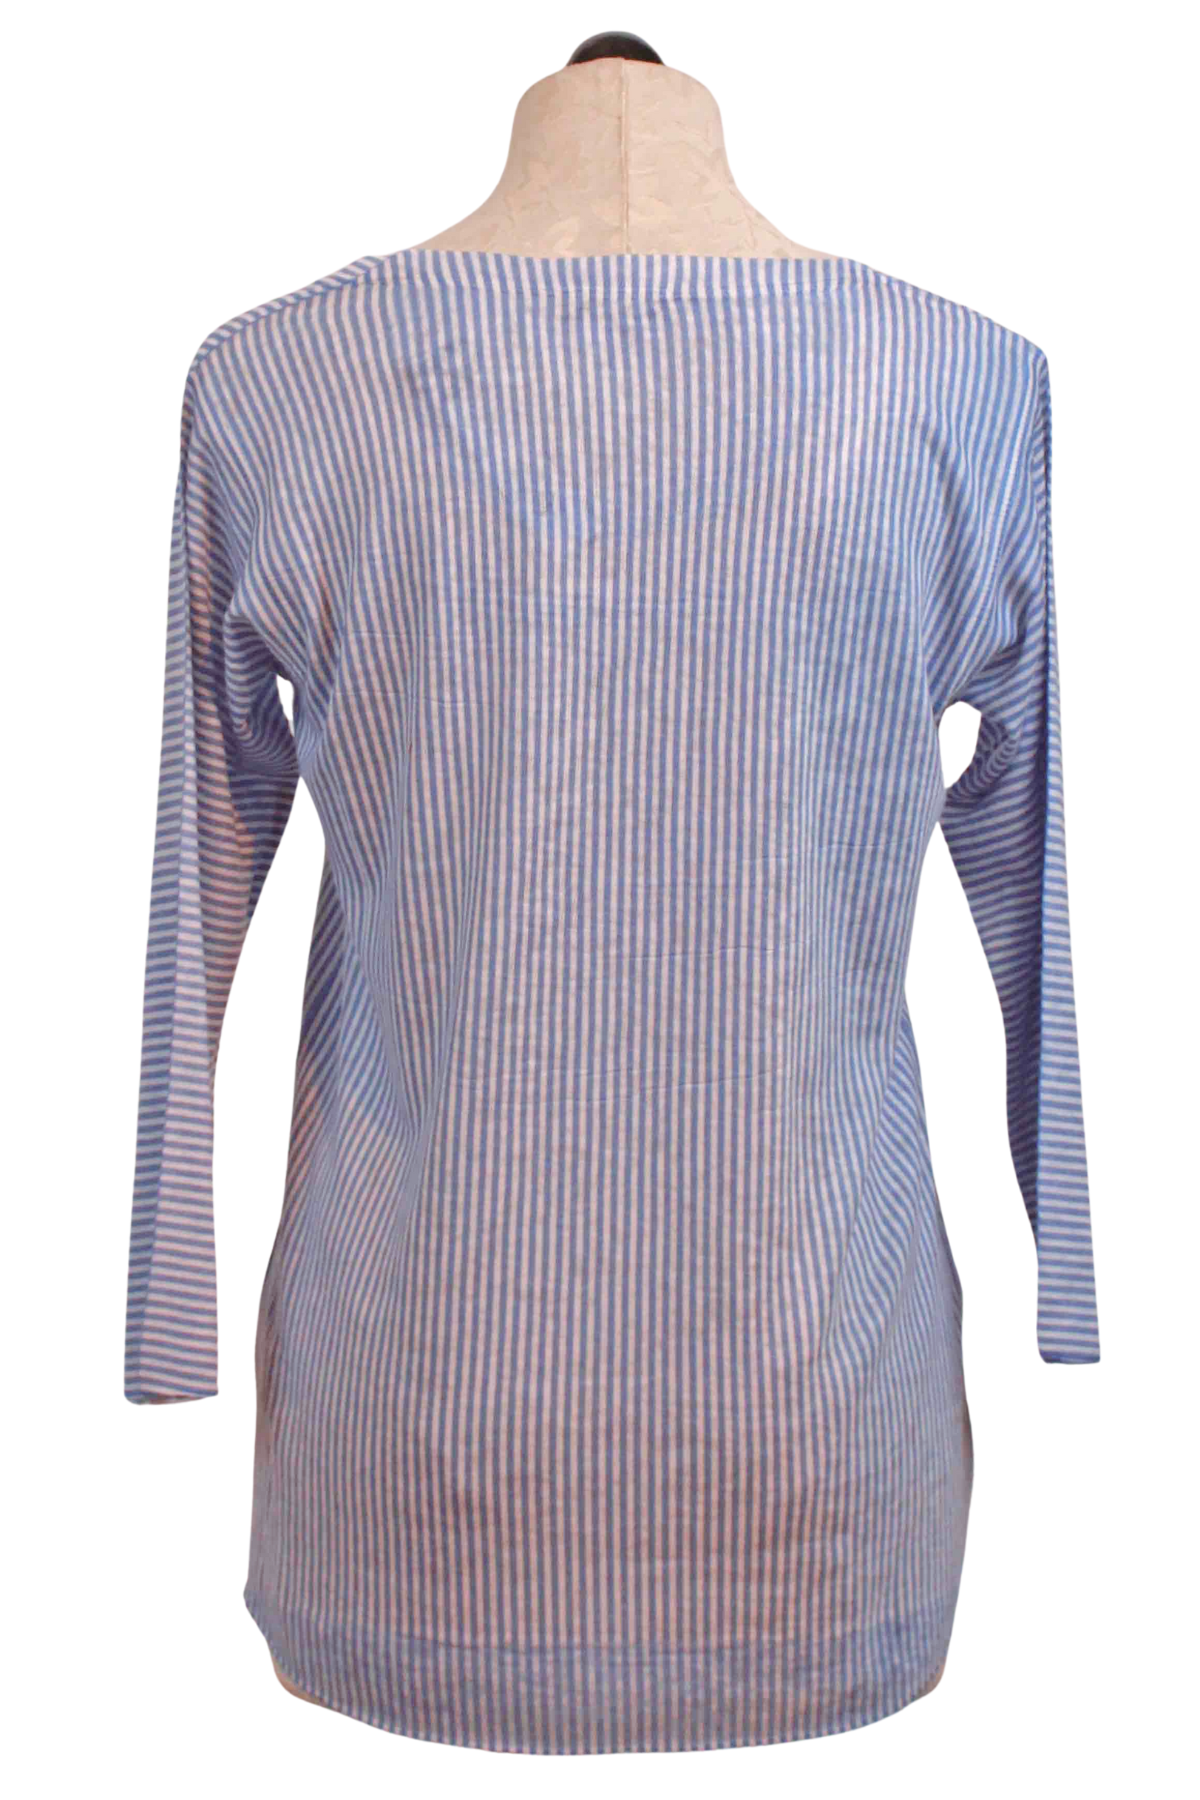 back view of Blue and White Striped Scooped Neck 3/4 Sleeve Top by Nally and Millie